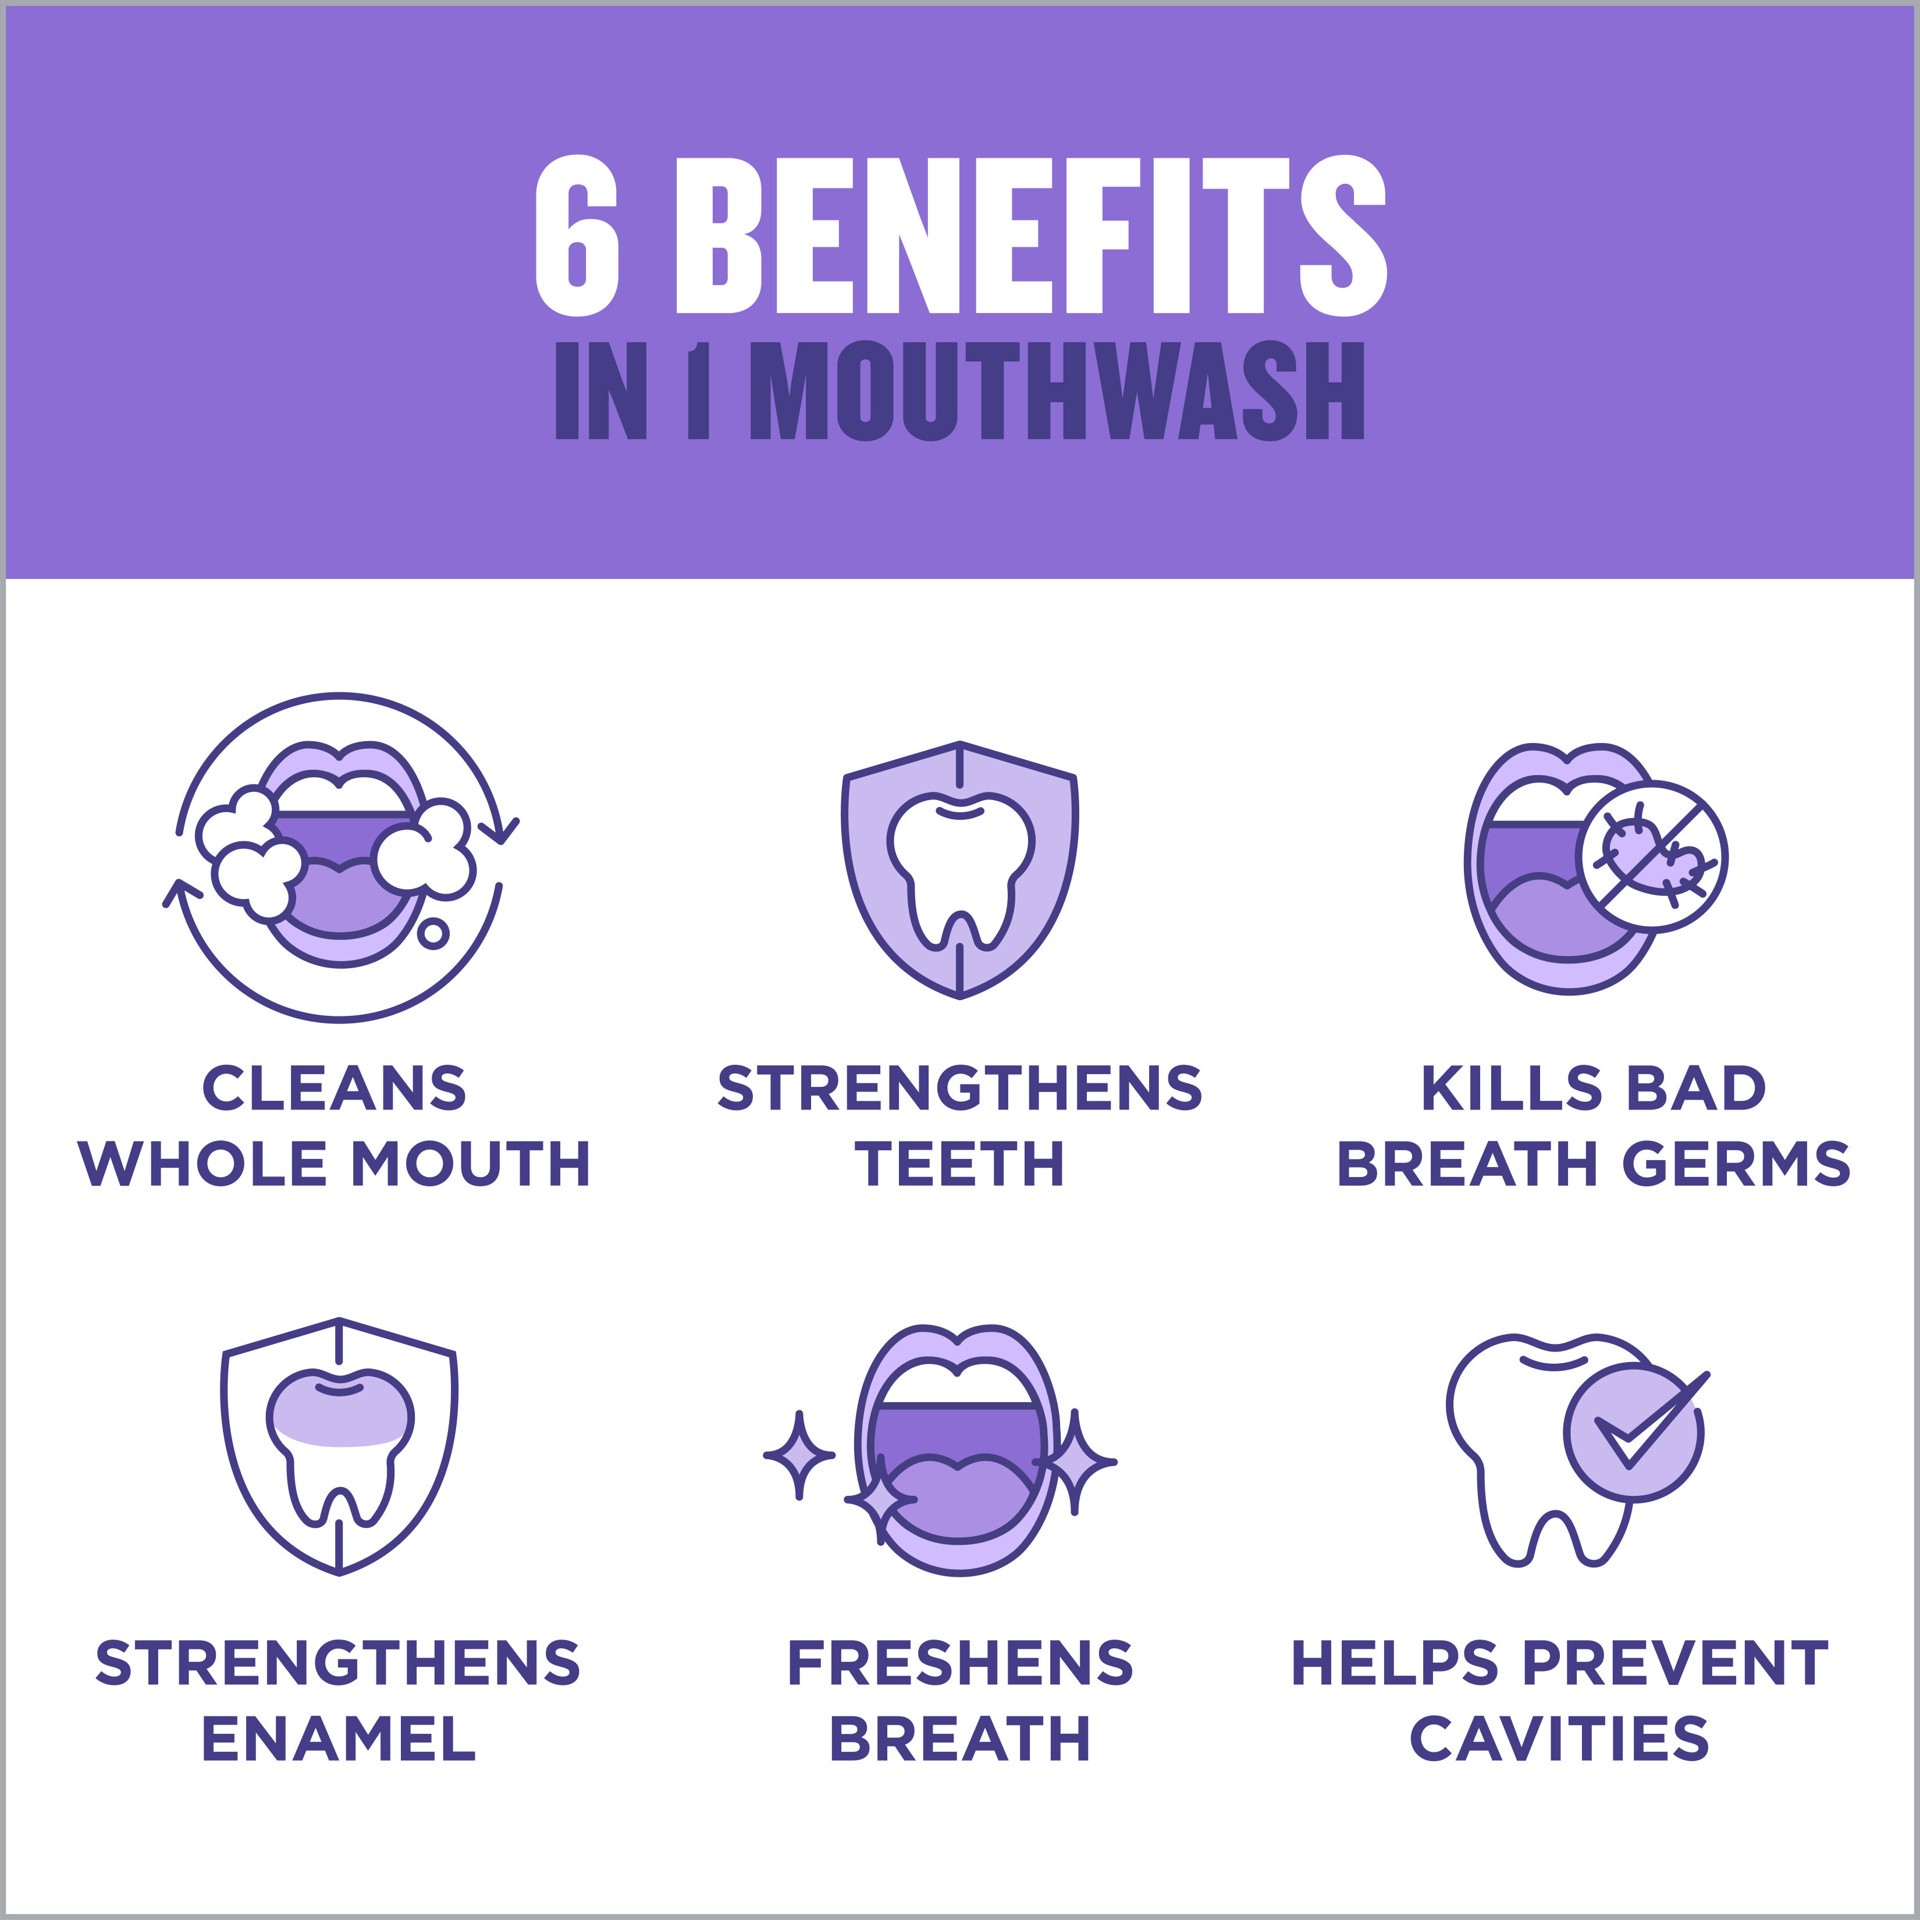 slide 10 of 10, Listerine Total Care Anticavity Fluoride Mouthwash, 6 Benefits in 1 Oral Rinse Helps Kill 99% of Bad Breath Germs, Prevents Cavities, Strengthens Teeth, ADA-Accepted, Fresh Mint, 1 L, 1 L